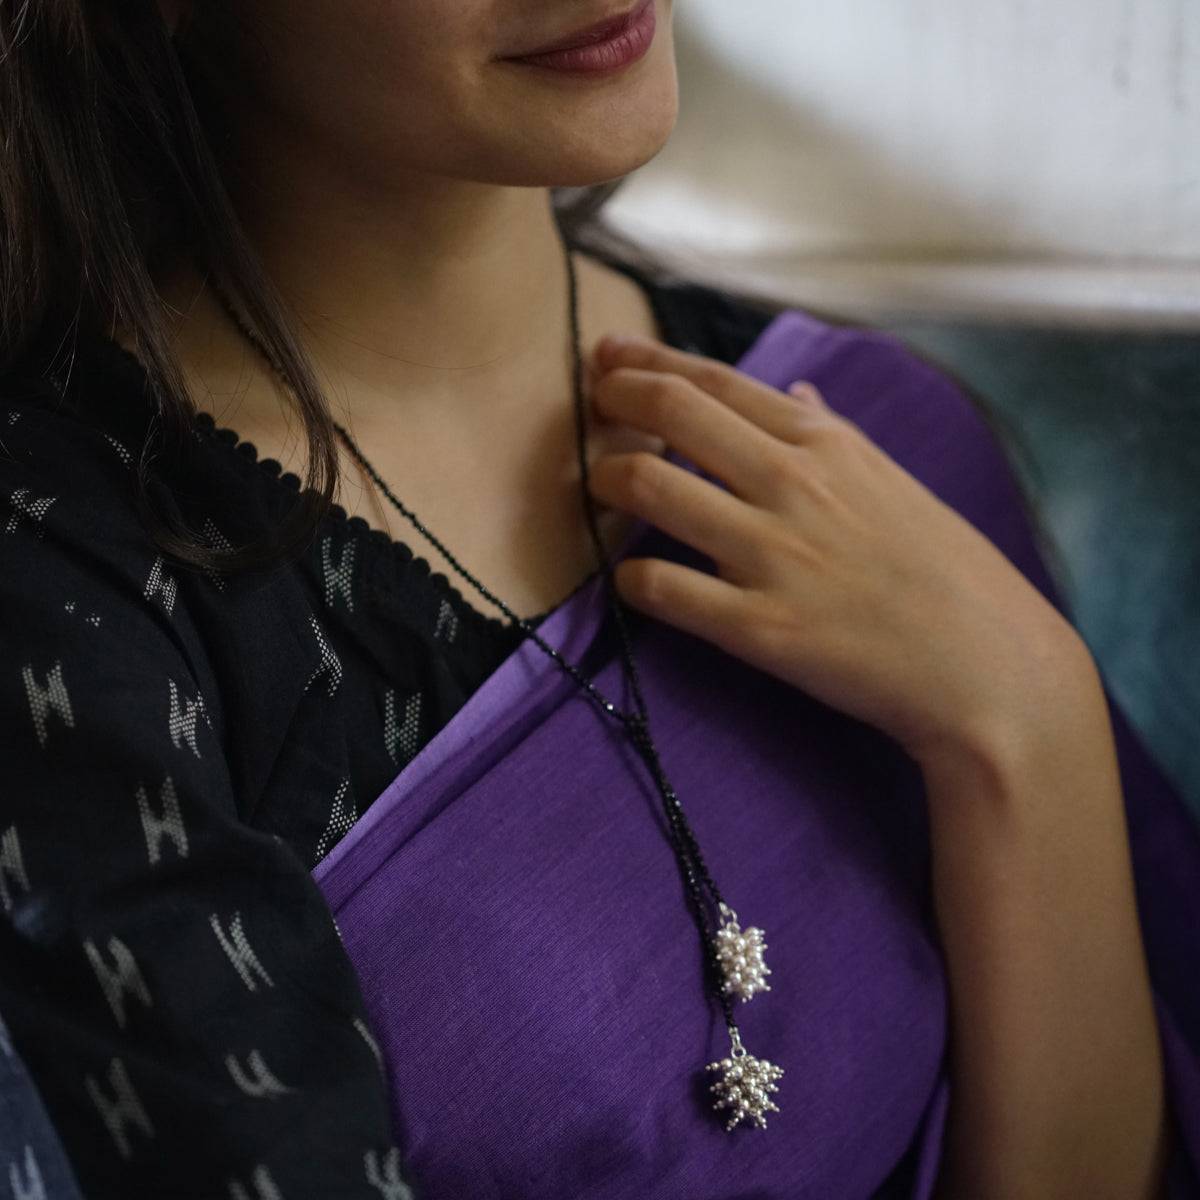 a woman wearing a purple shirt and a black and white necklace